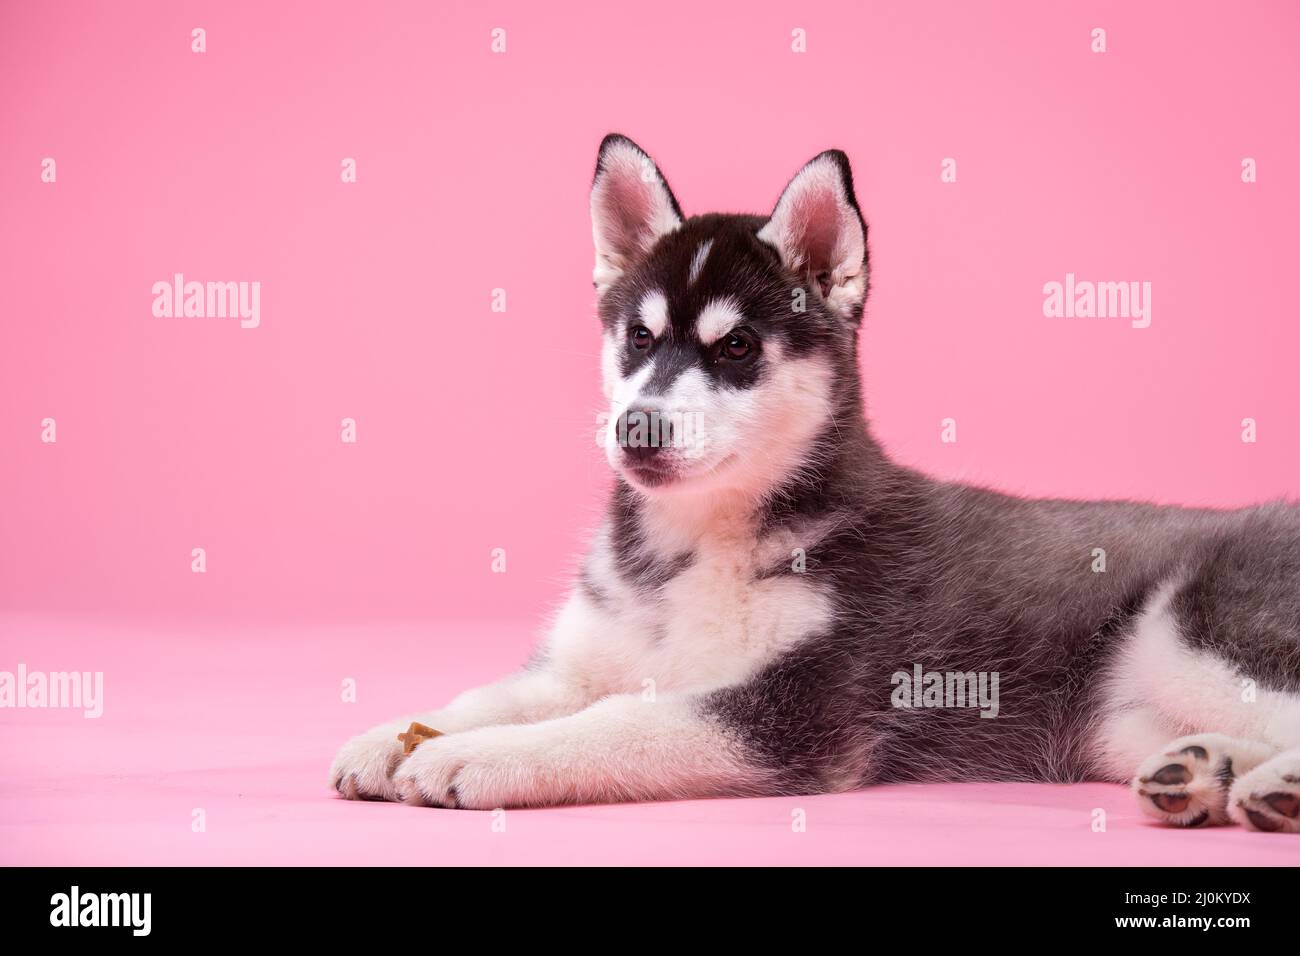 Puppy cute dog of breed siberian husky gray with black and white color on a pink background in the studio. Pets theme. Husky les Stock Photo